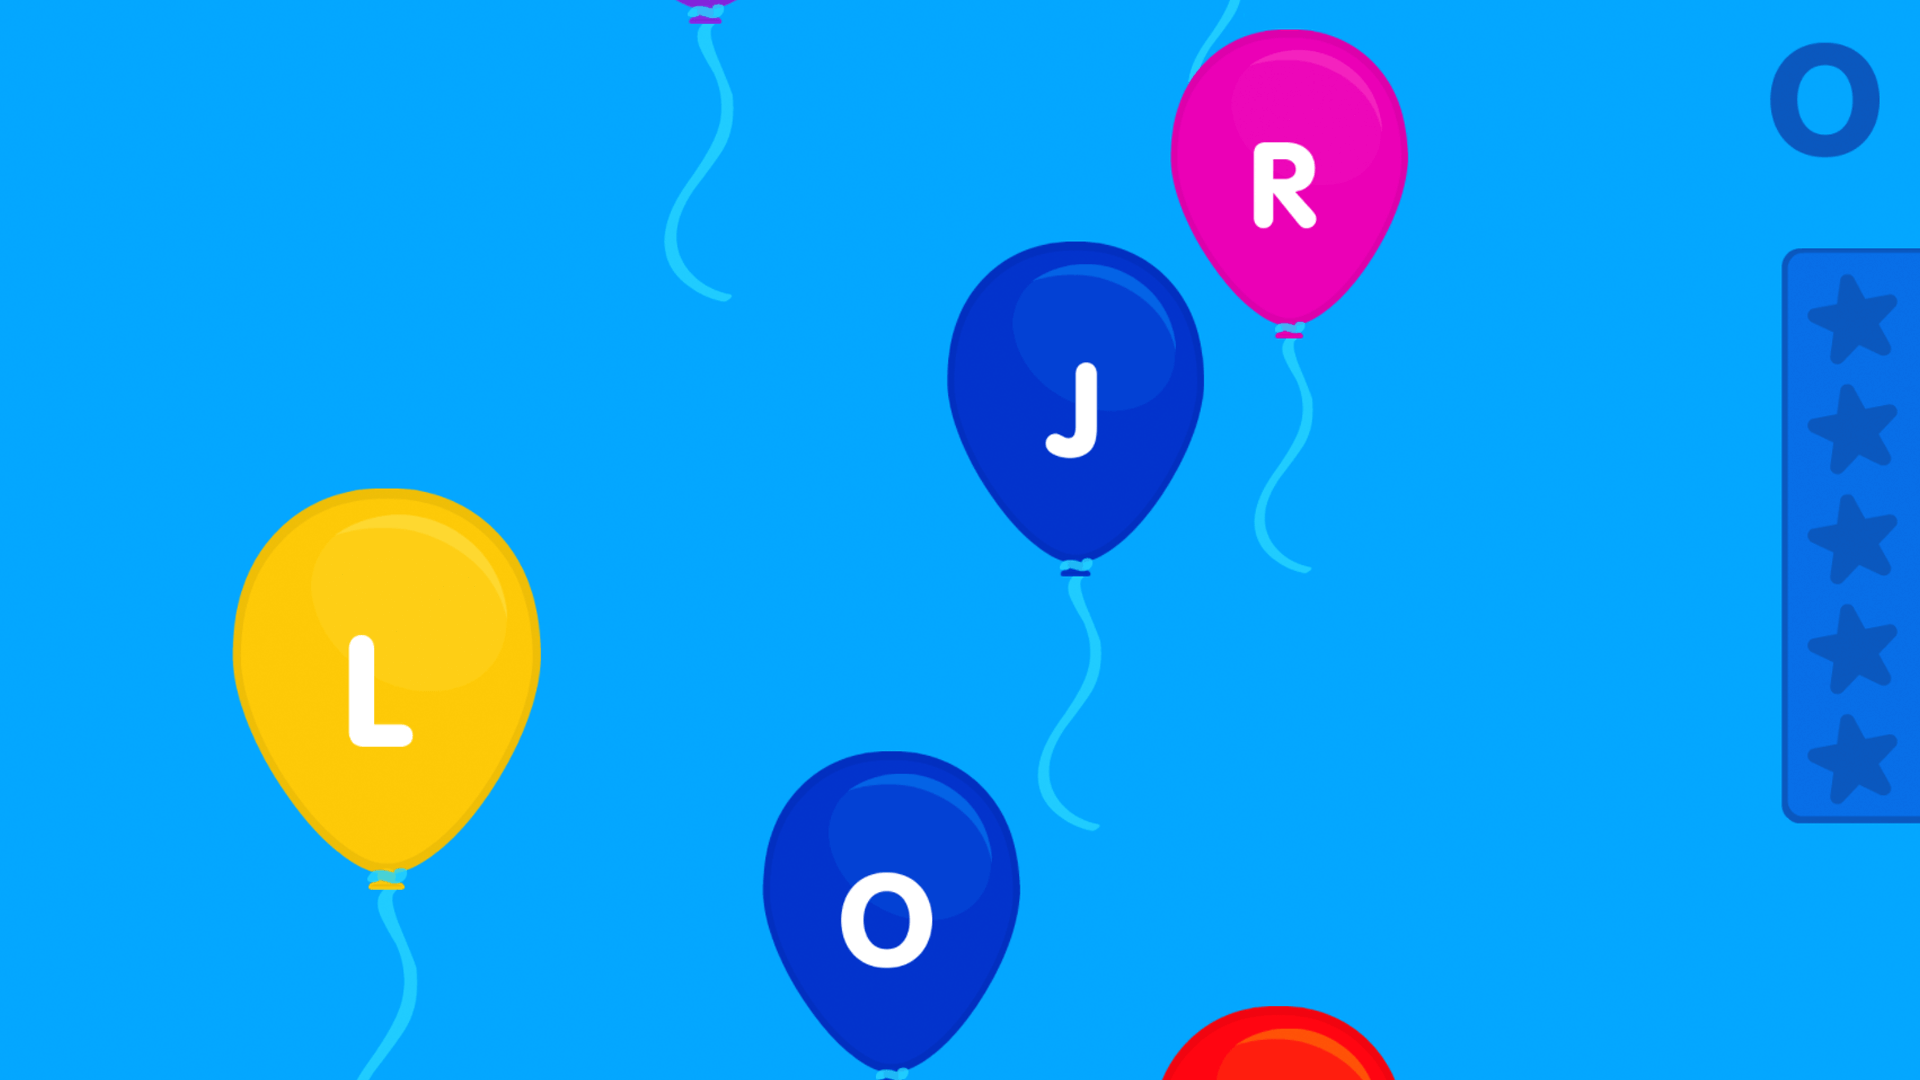 balloon with letters